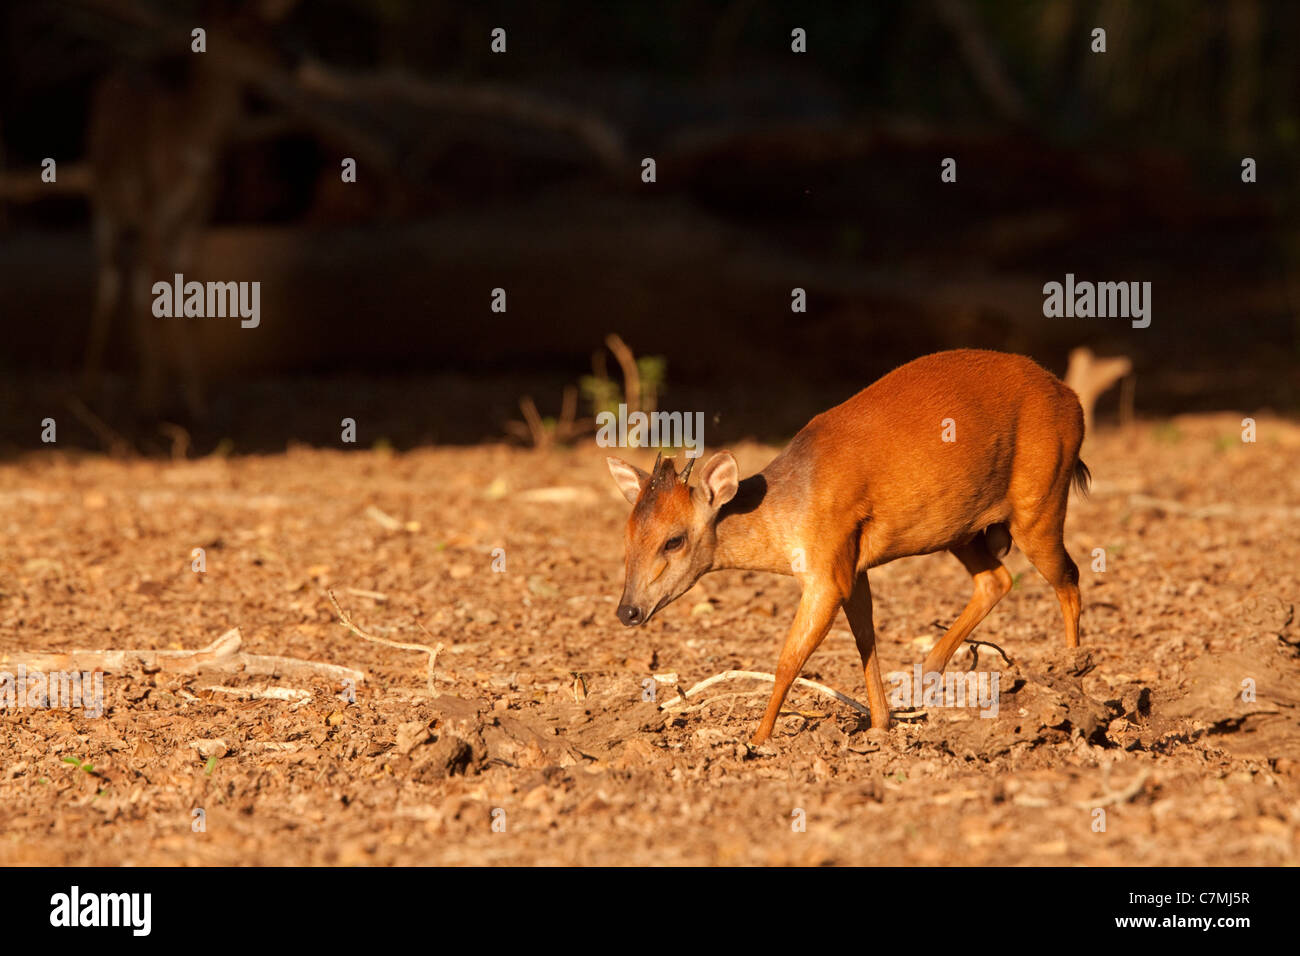 Red Forest Duiker (Cephalophus natalensis). Among the Sycamore fig trees, the Red Duiker searches for the fallen fruits of these Stock Photo